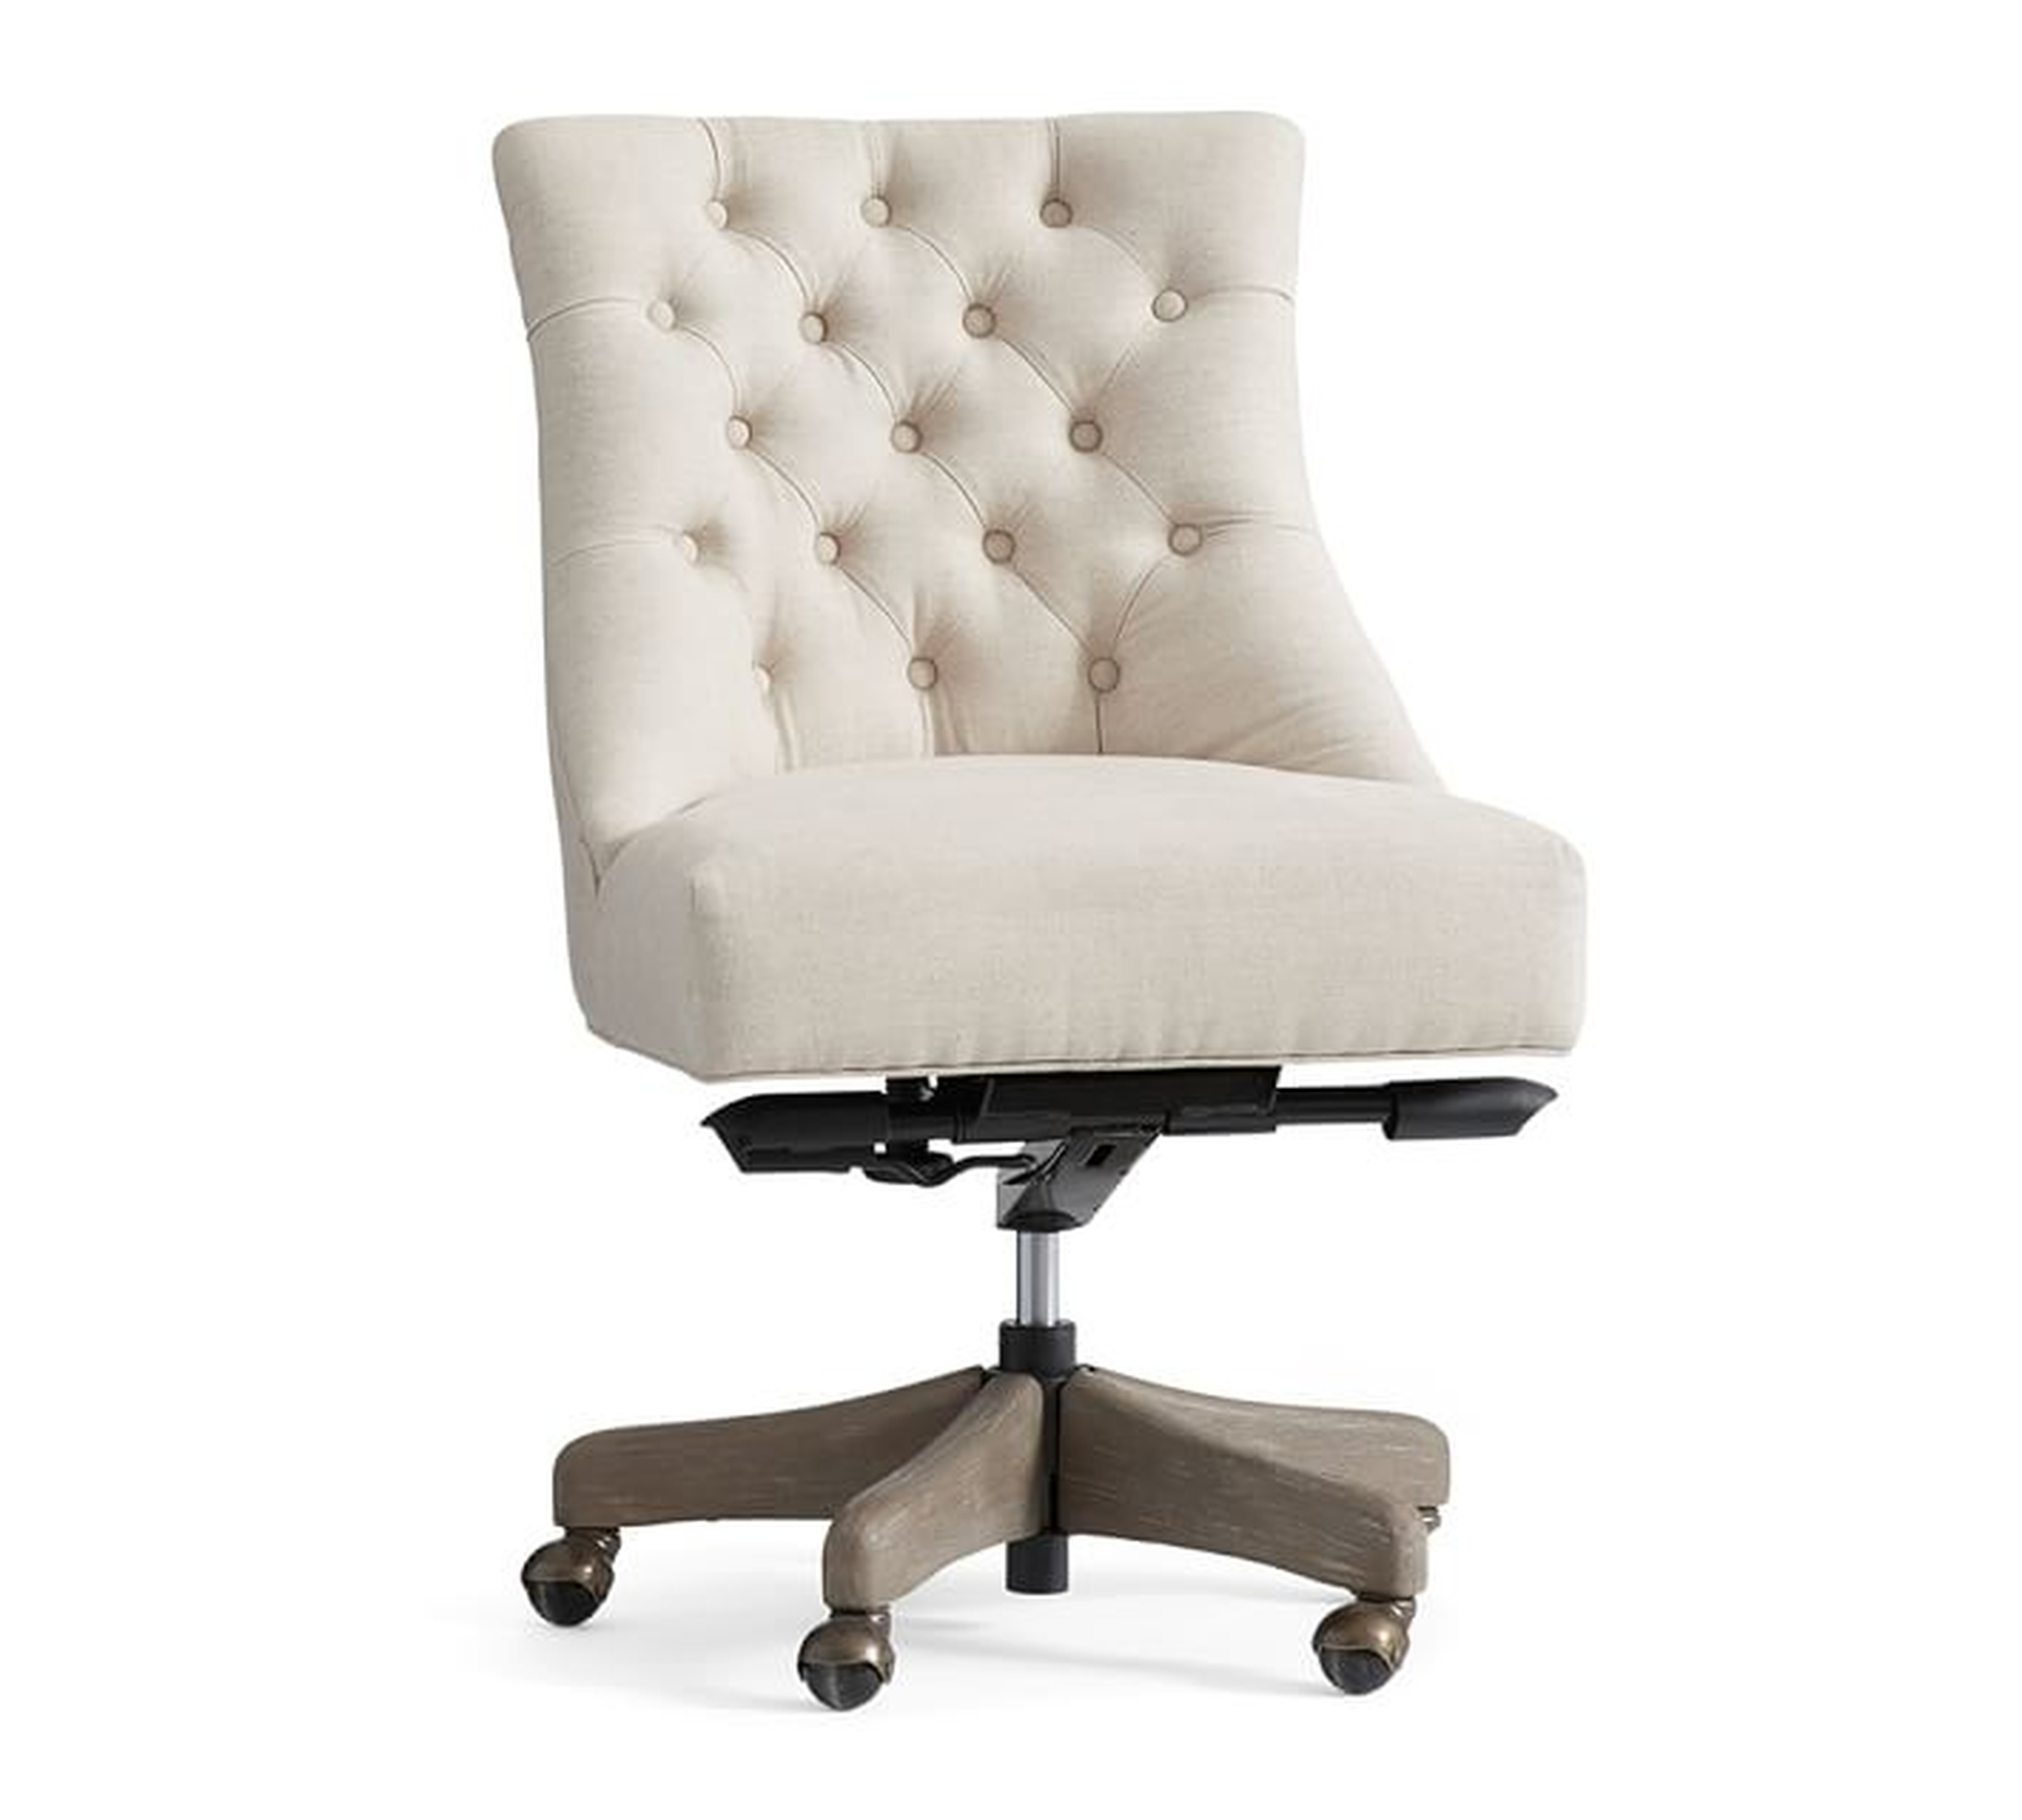 HAYES TUFTED SWIVEL DESK CHAIR - Pottery Barn